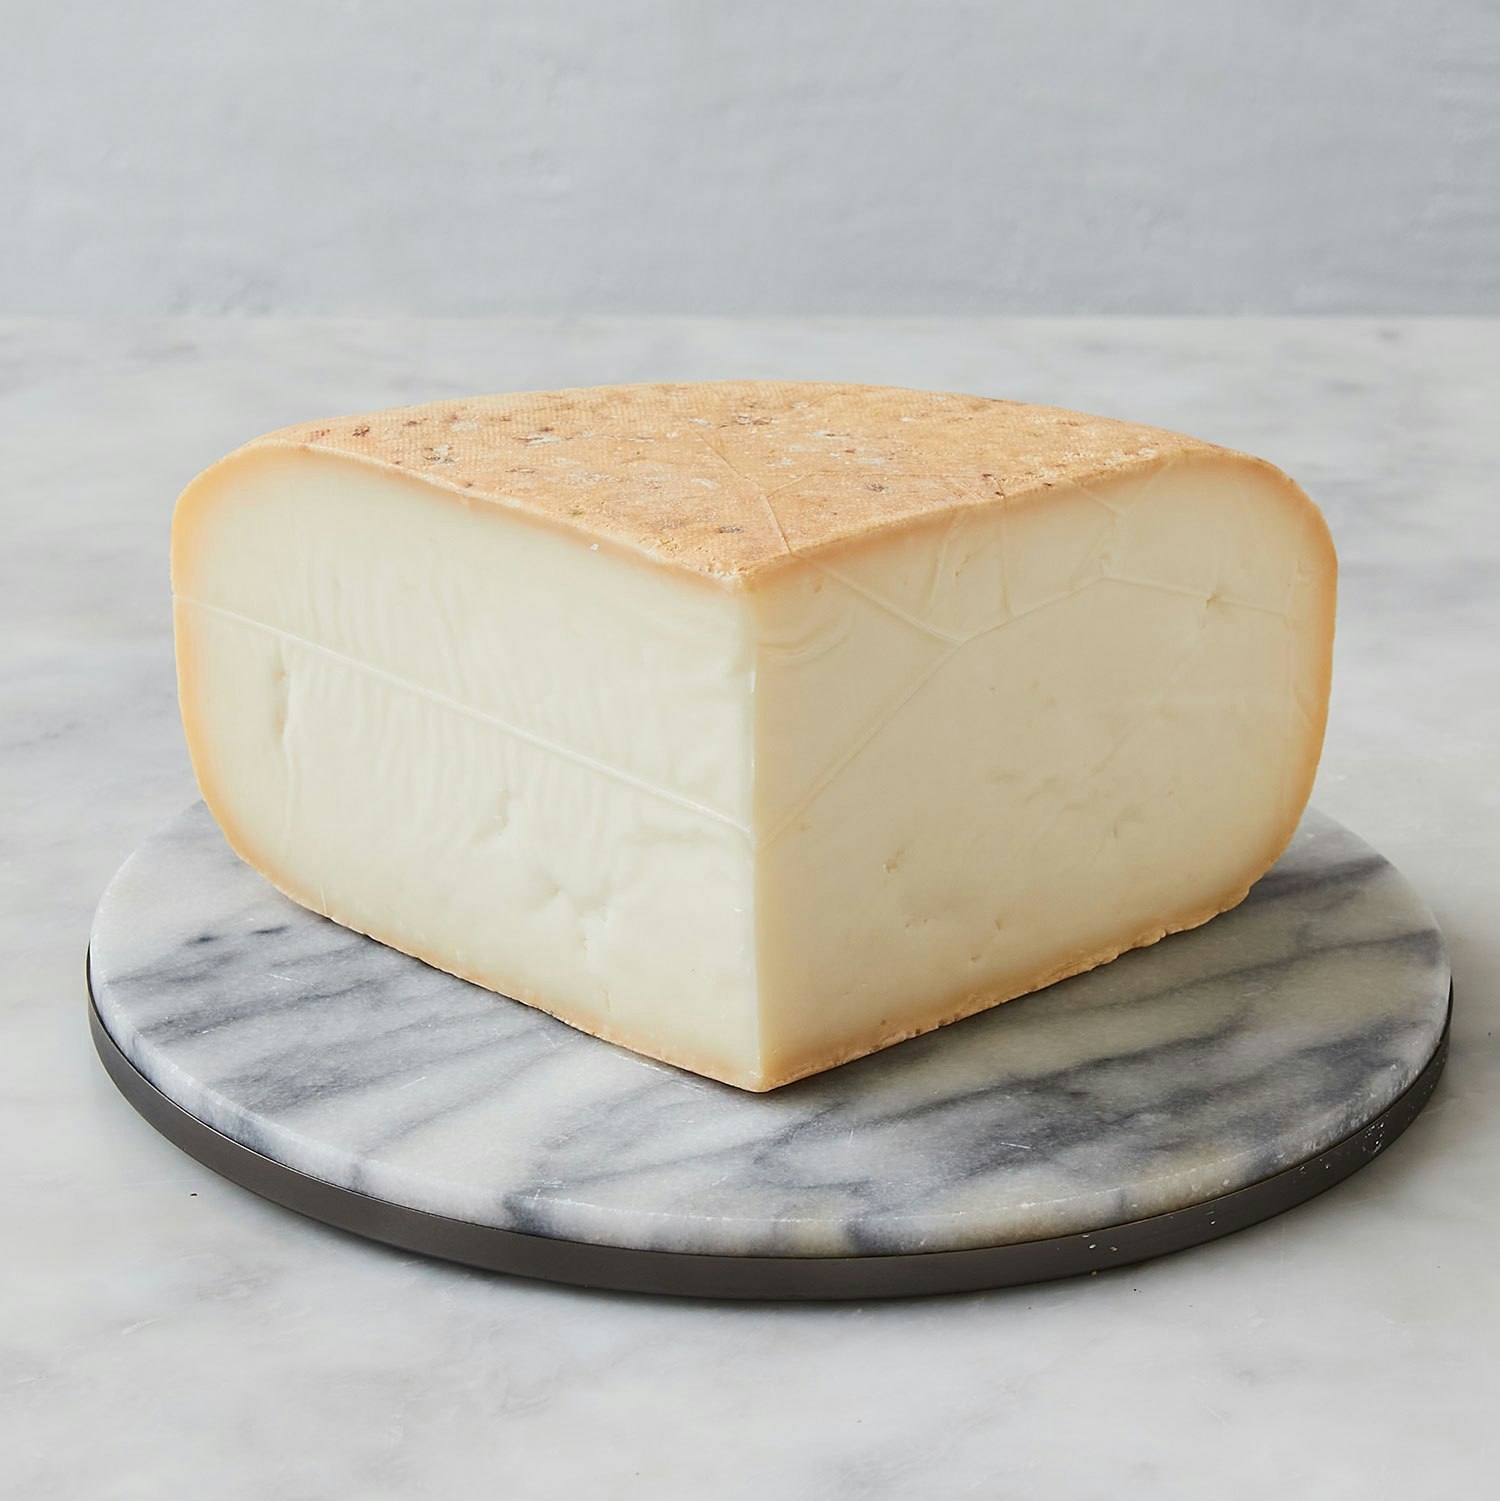 Lively Run Dairy Finger Lakes Gold cheese